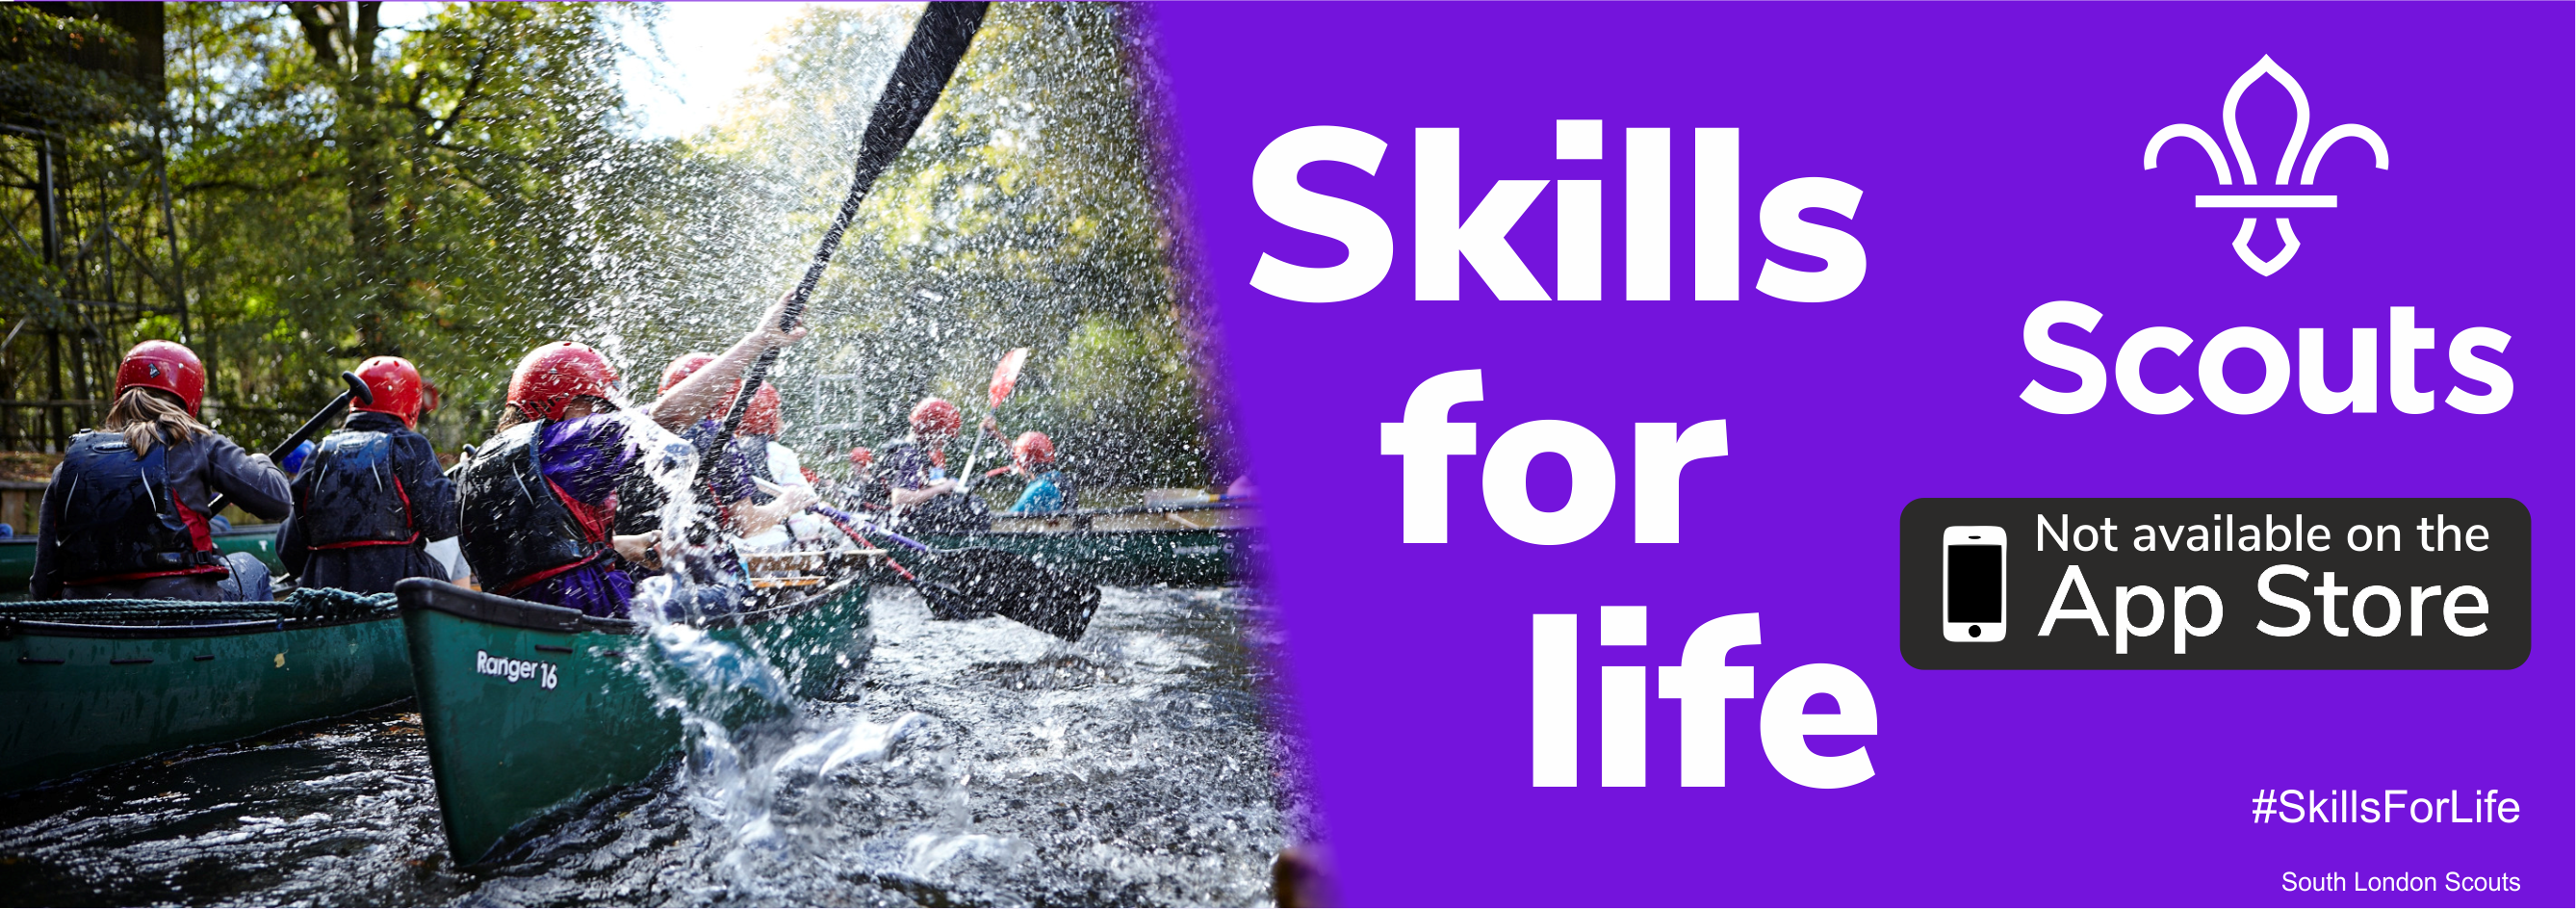 Scouts - Skills for life!